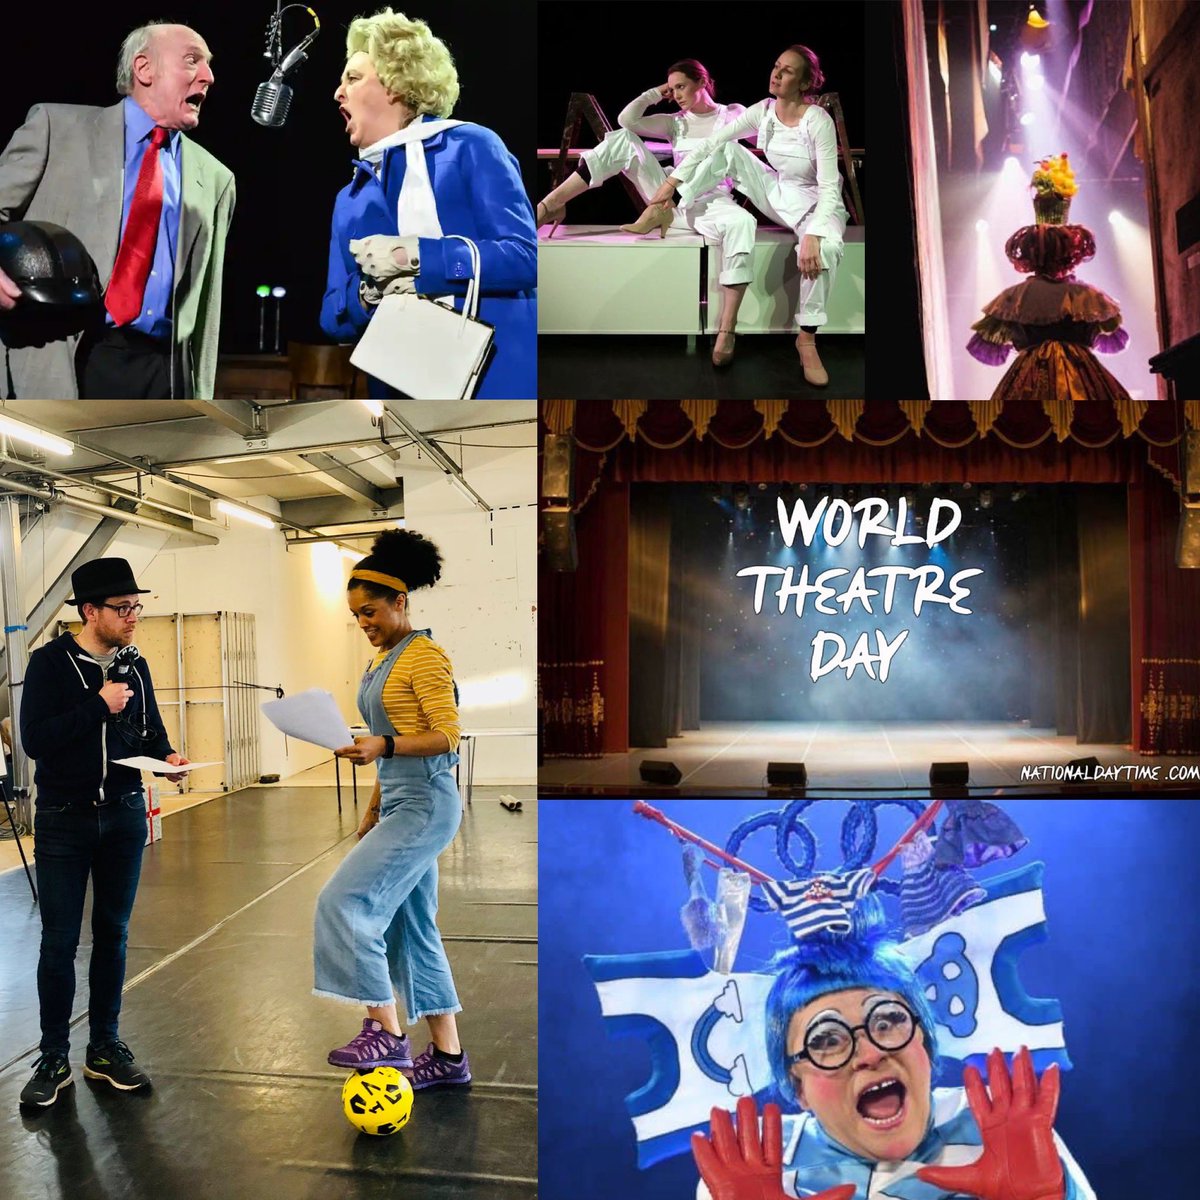 #HappyWorldTheatreDay 2022 to our brilliant clients and the incredible companies they work with. Big shout outs to @DerbyTheatre @bridspa @fidgettheatre @InParallelProd @BugLightTheatre @birminghamstage @choltheatre @PHApantos @ABPtheatreshows @Bloomin_Buds and oh so many more 💙